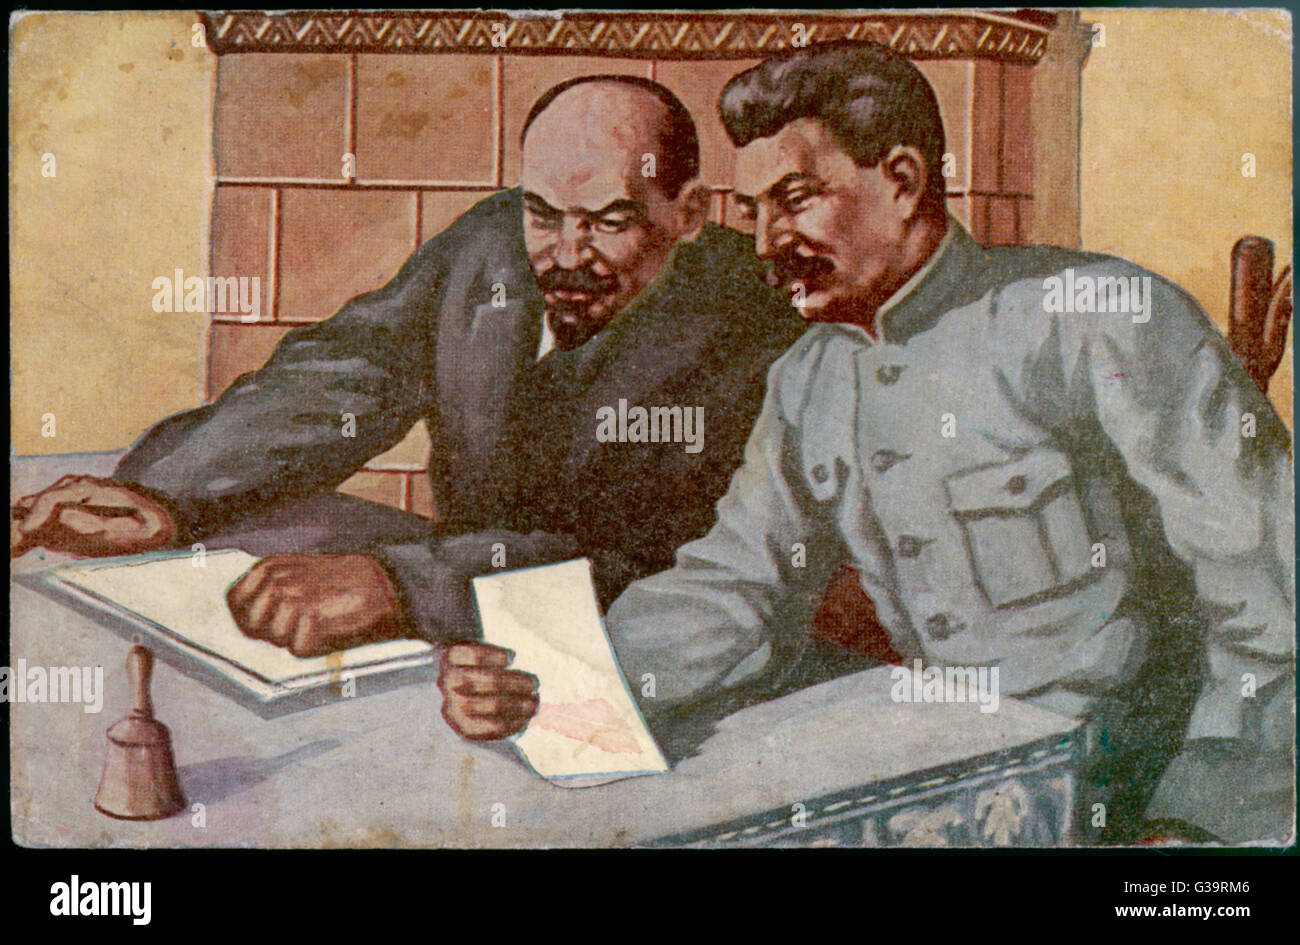 LENIN and STALIN discuss their plans         Date: circa 1920 Stock Photo